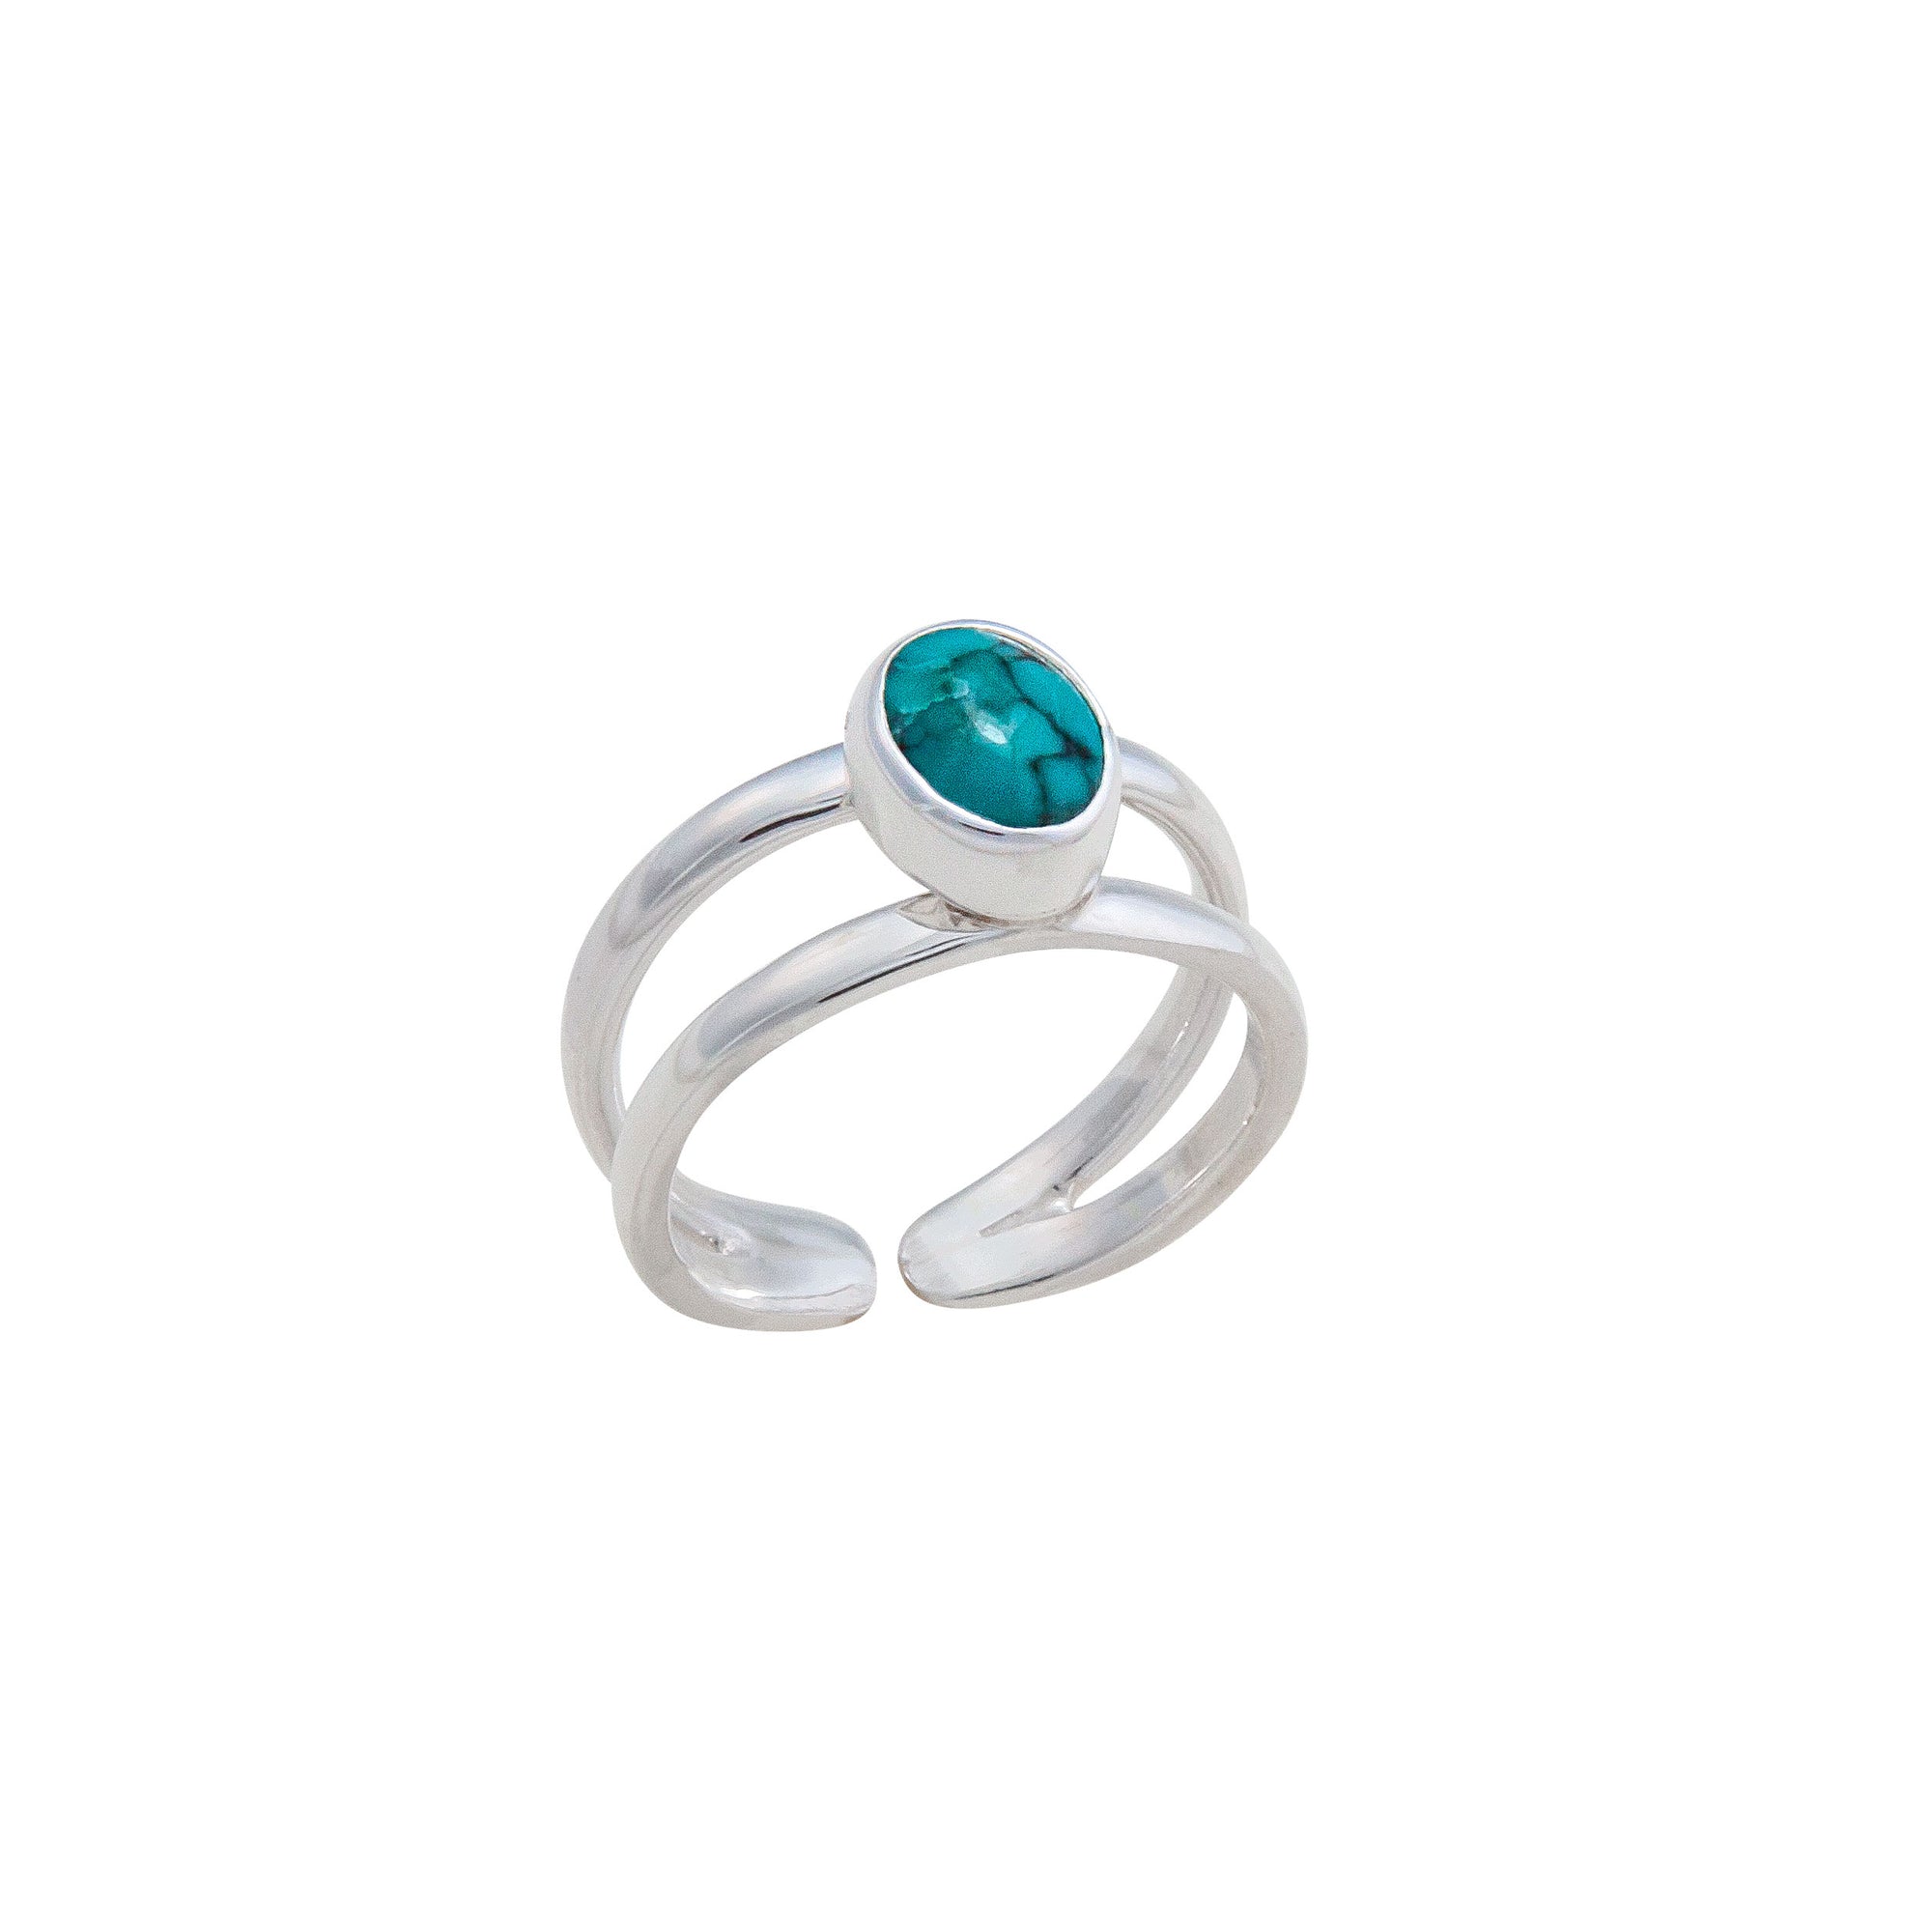 Sterling Silver Turquoise Cuff Ring | Charles Albert Jewelry